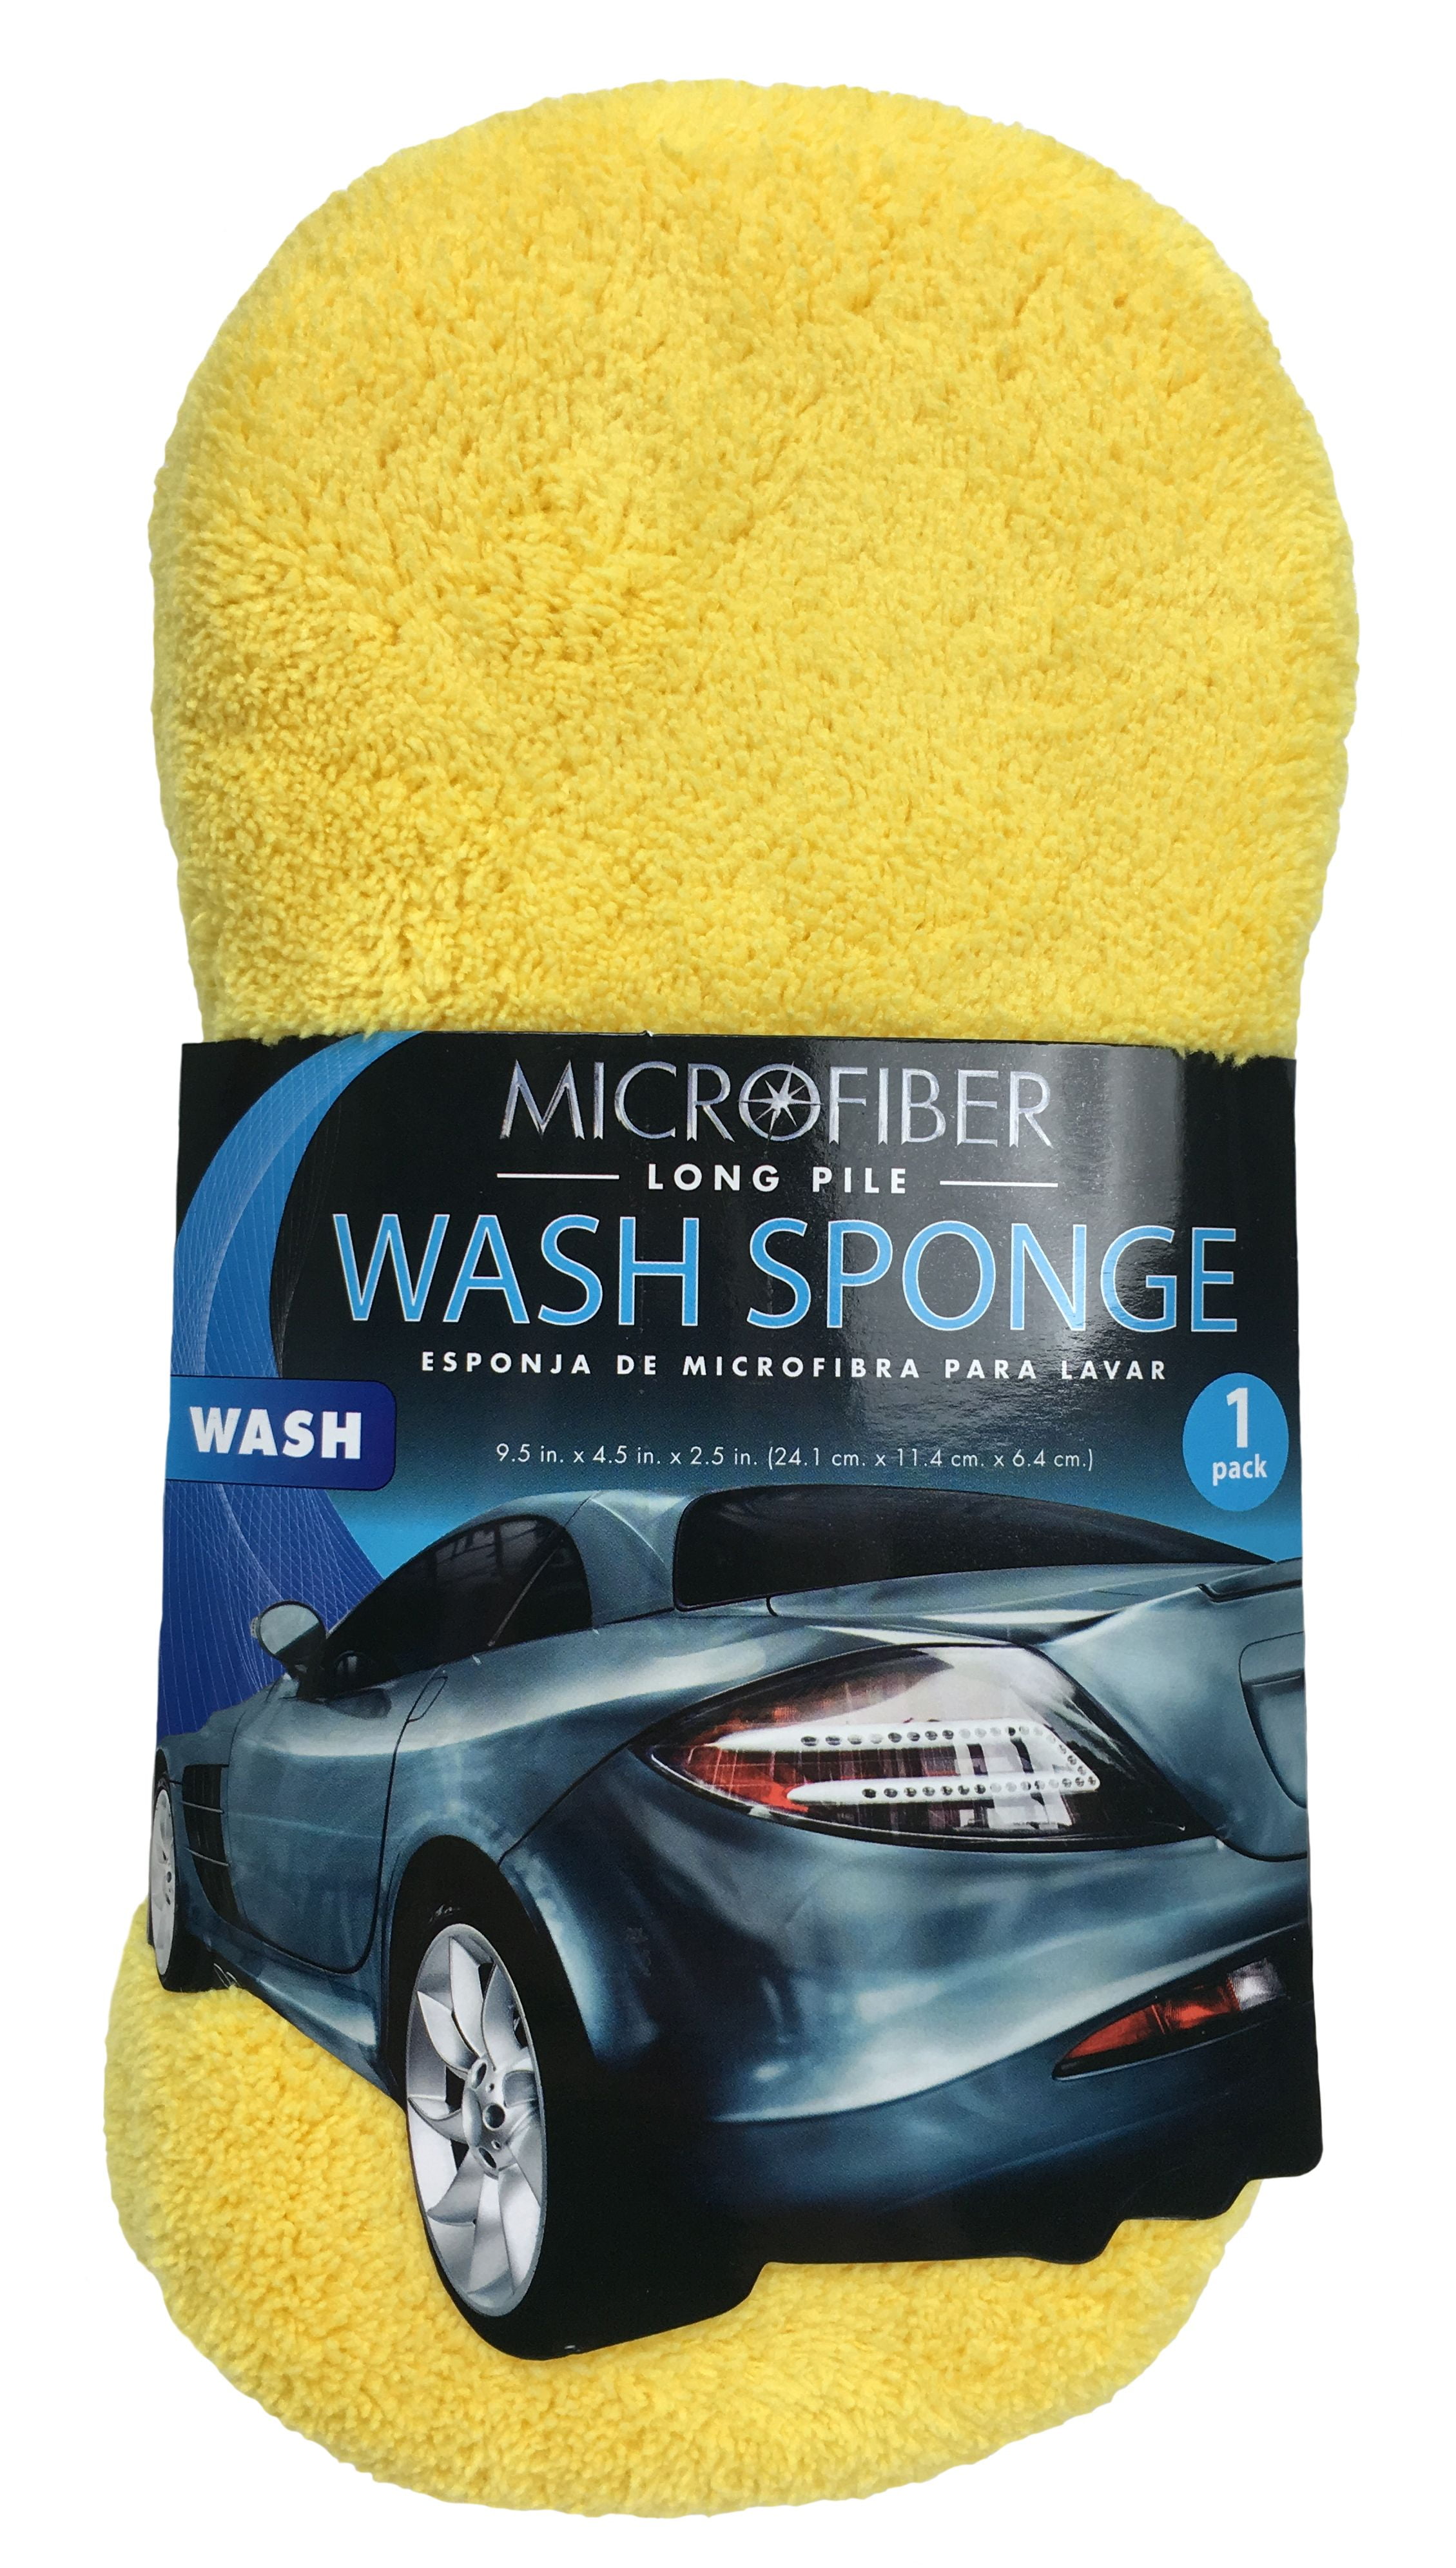 Car Wash Sponge. Made in Europe. 7.9X5.1X2.8 Inches. Large Sponge